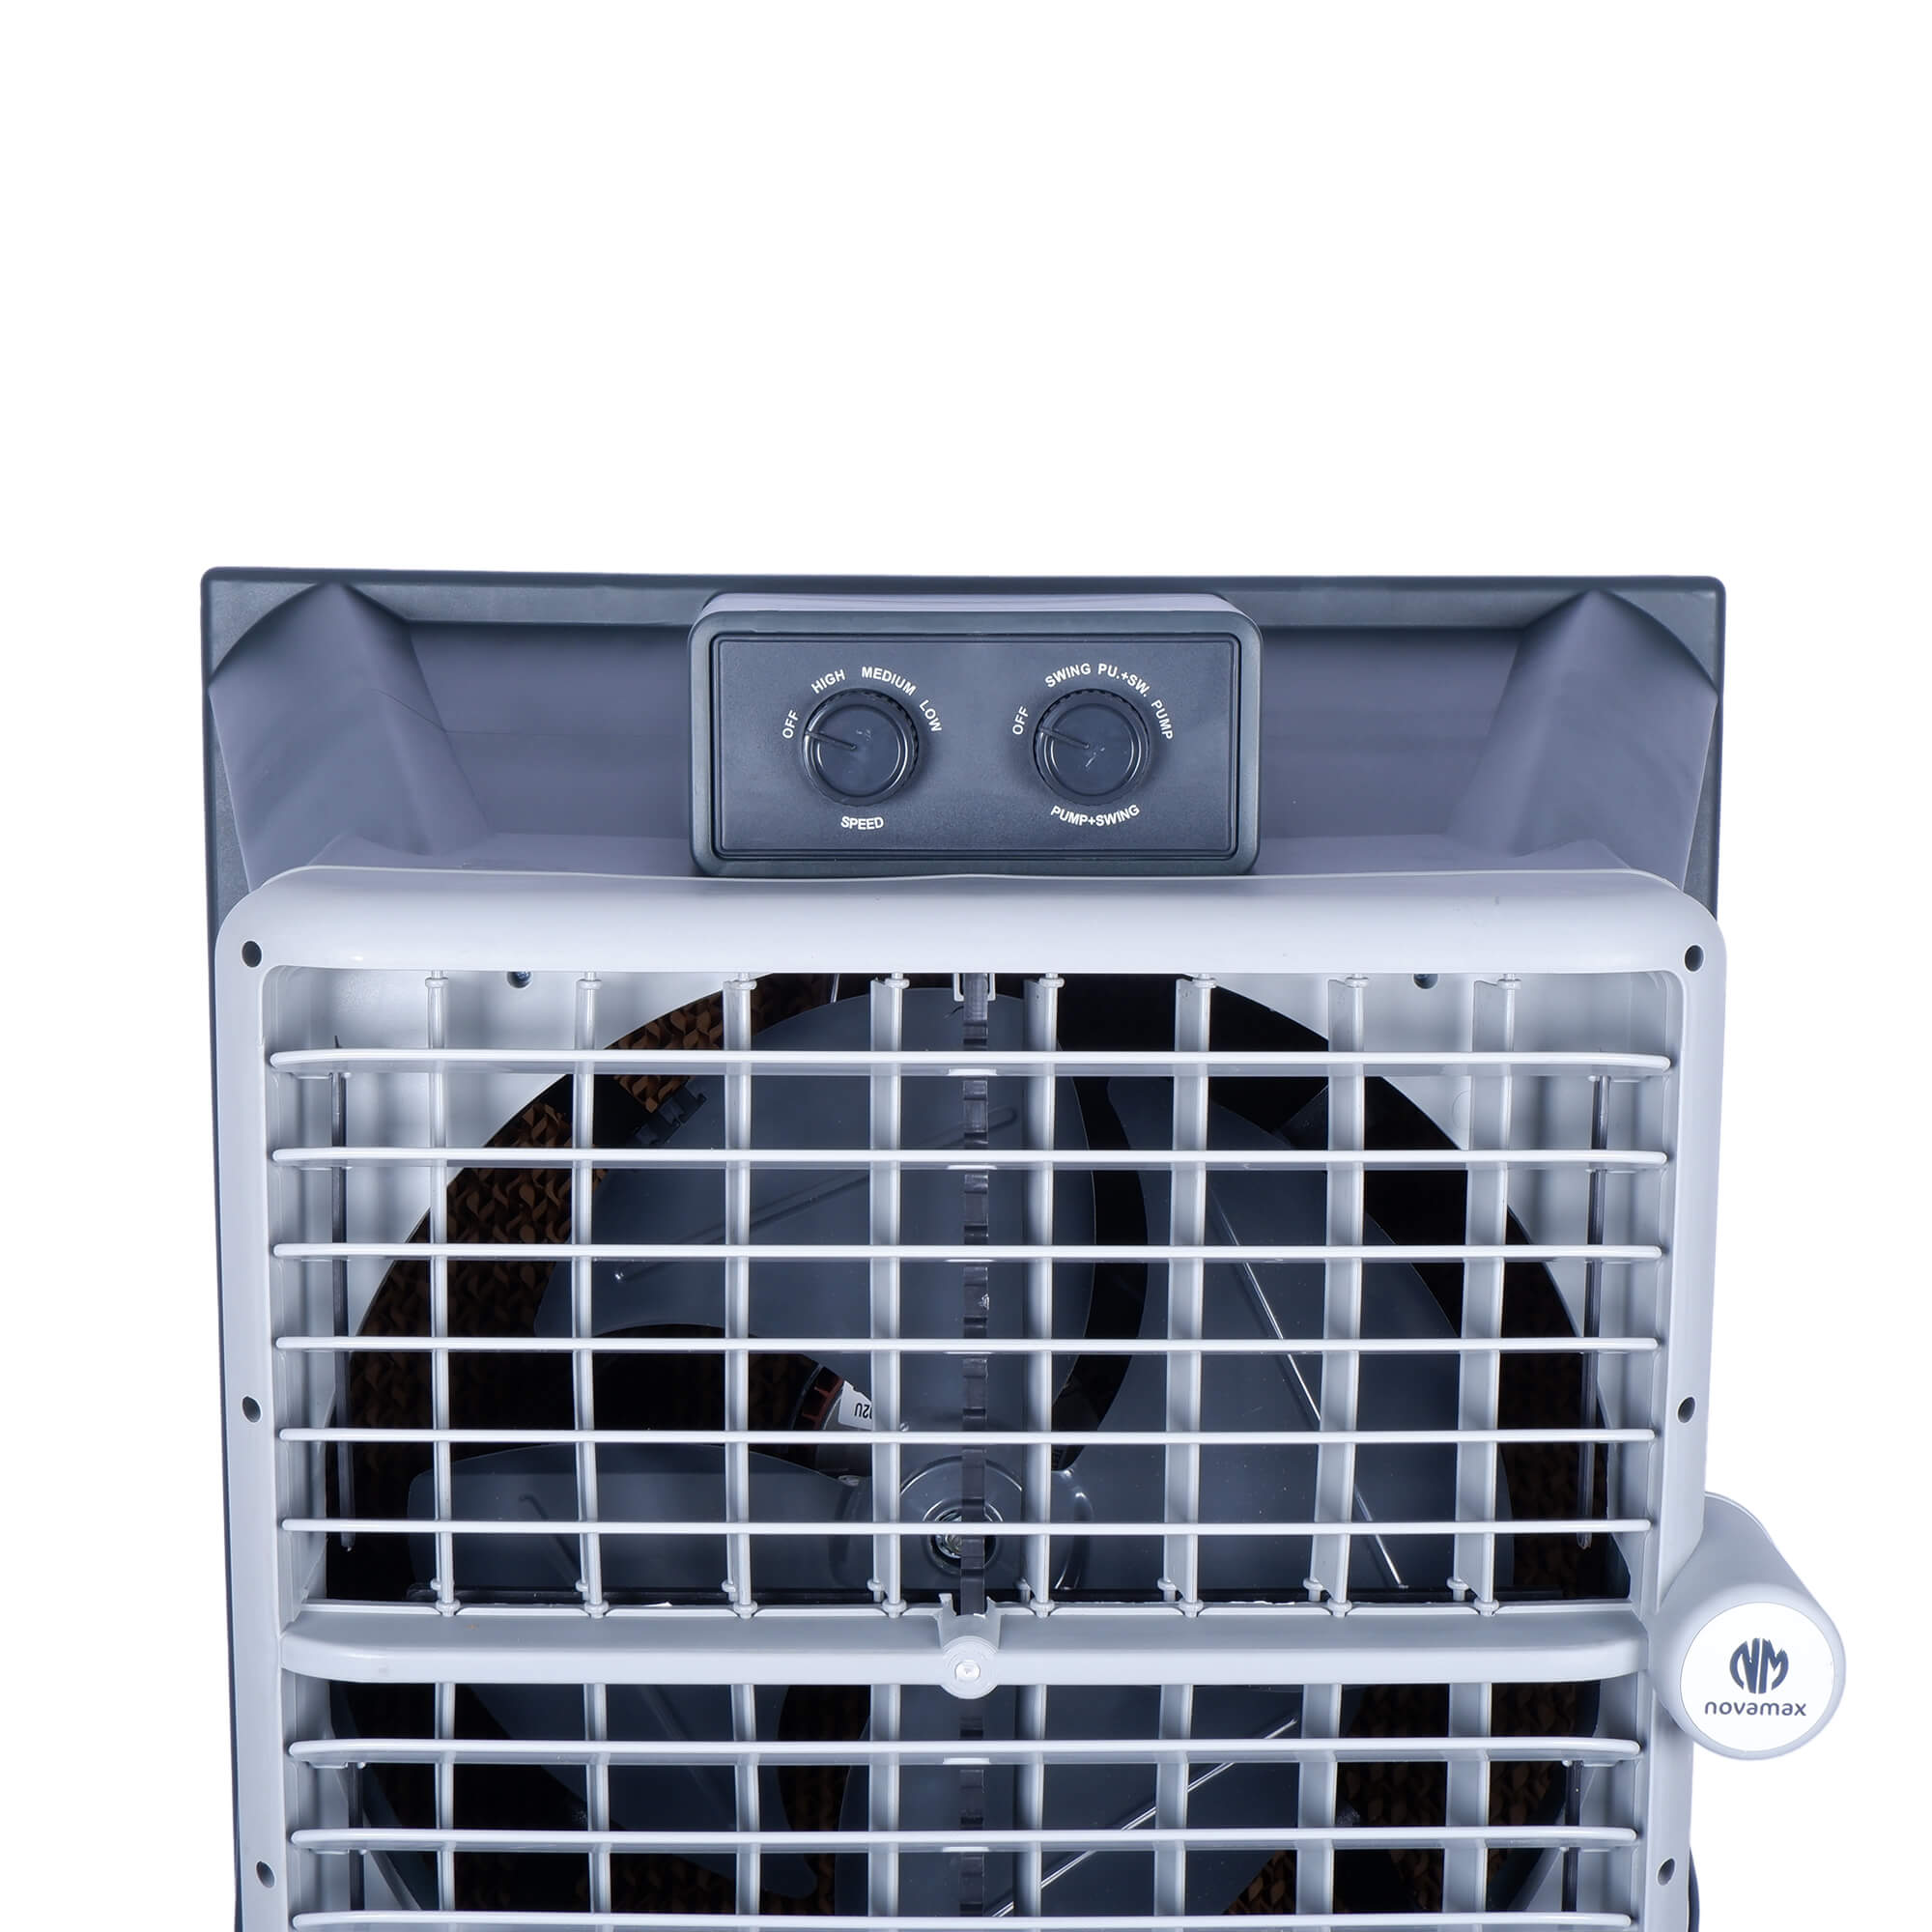 GLOSTER 125Plus (Grey, Gloster 125 L Desert Air Cooler With Powerful Air Throw, Honeycomb Cooling & Auto Swing Technology)